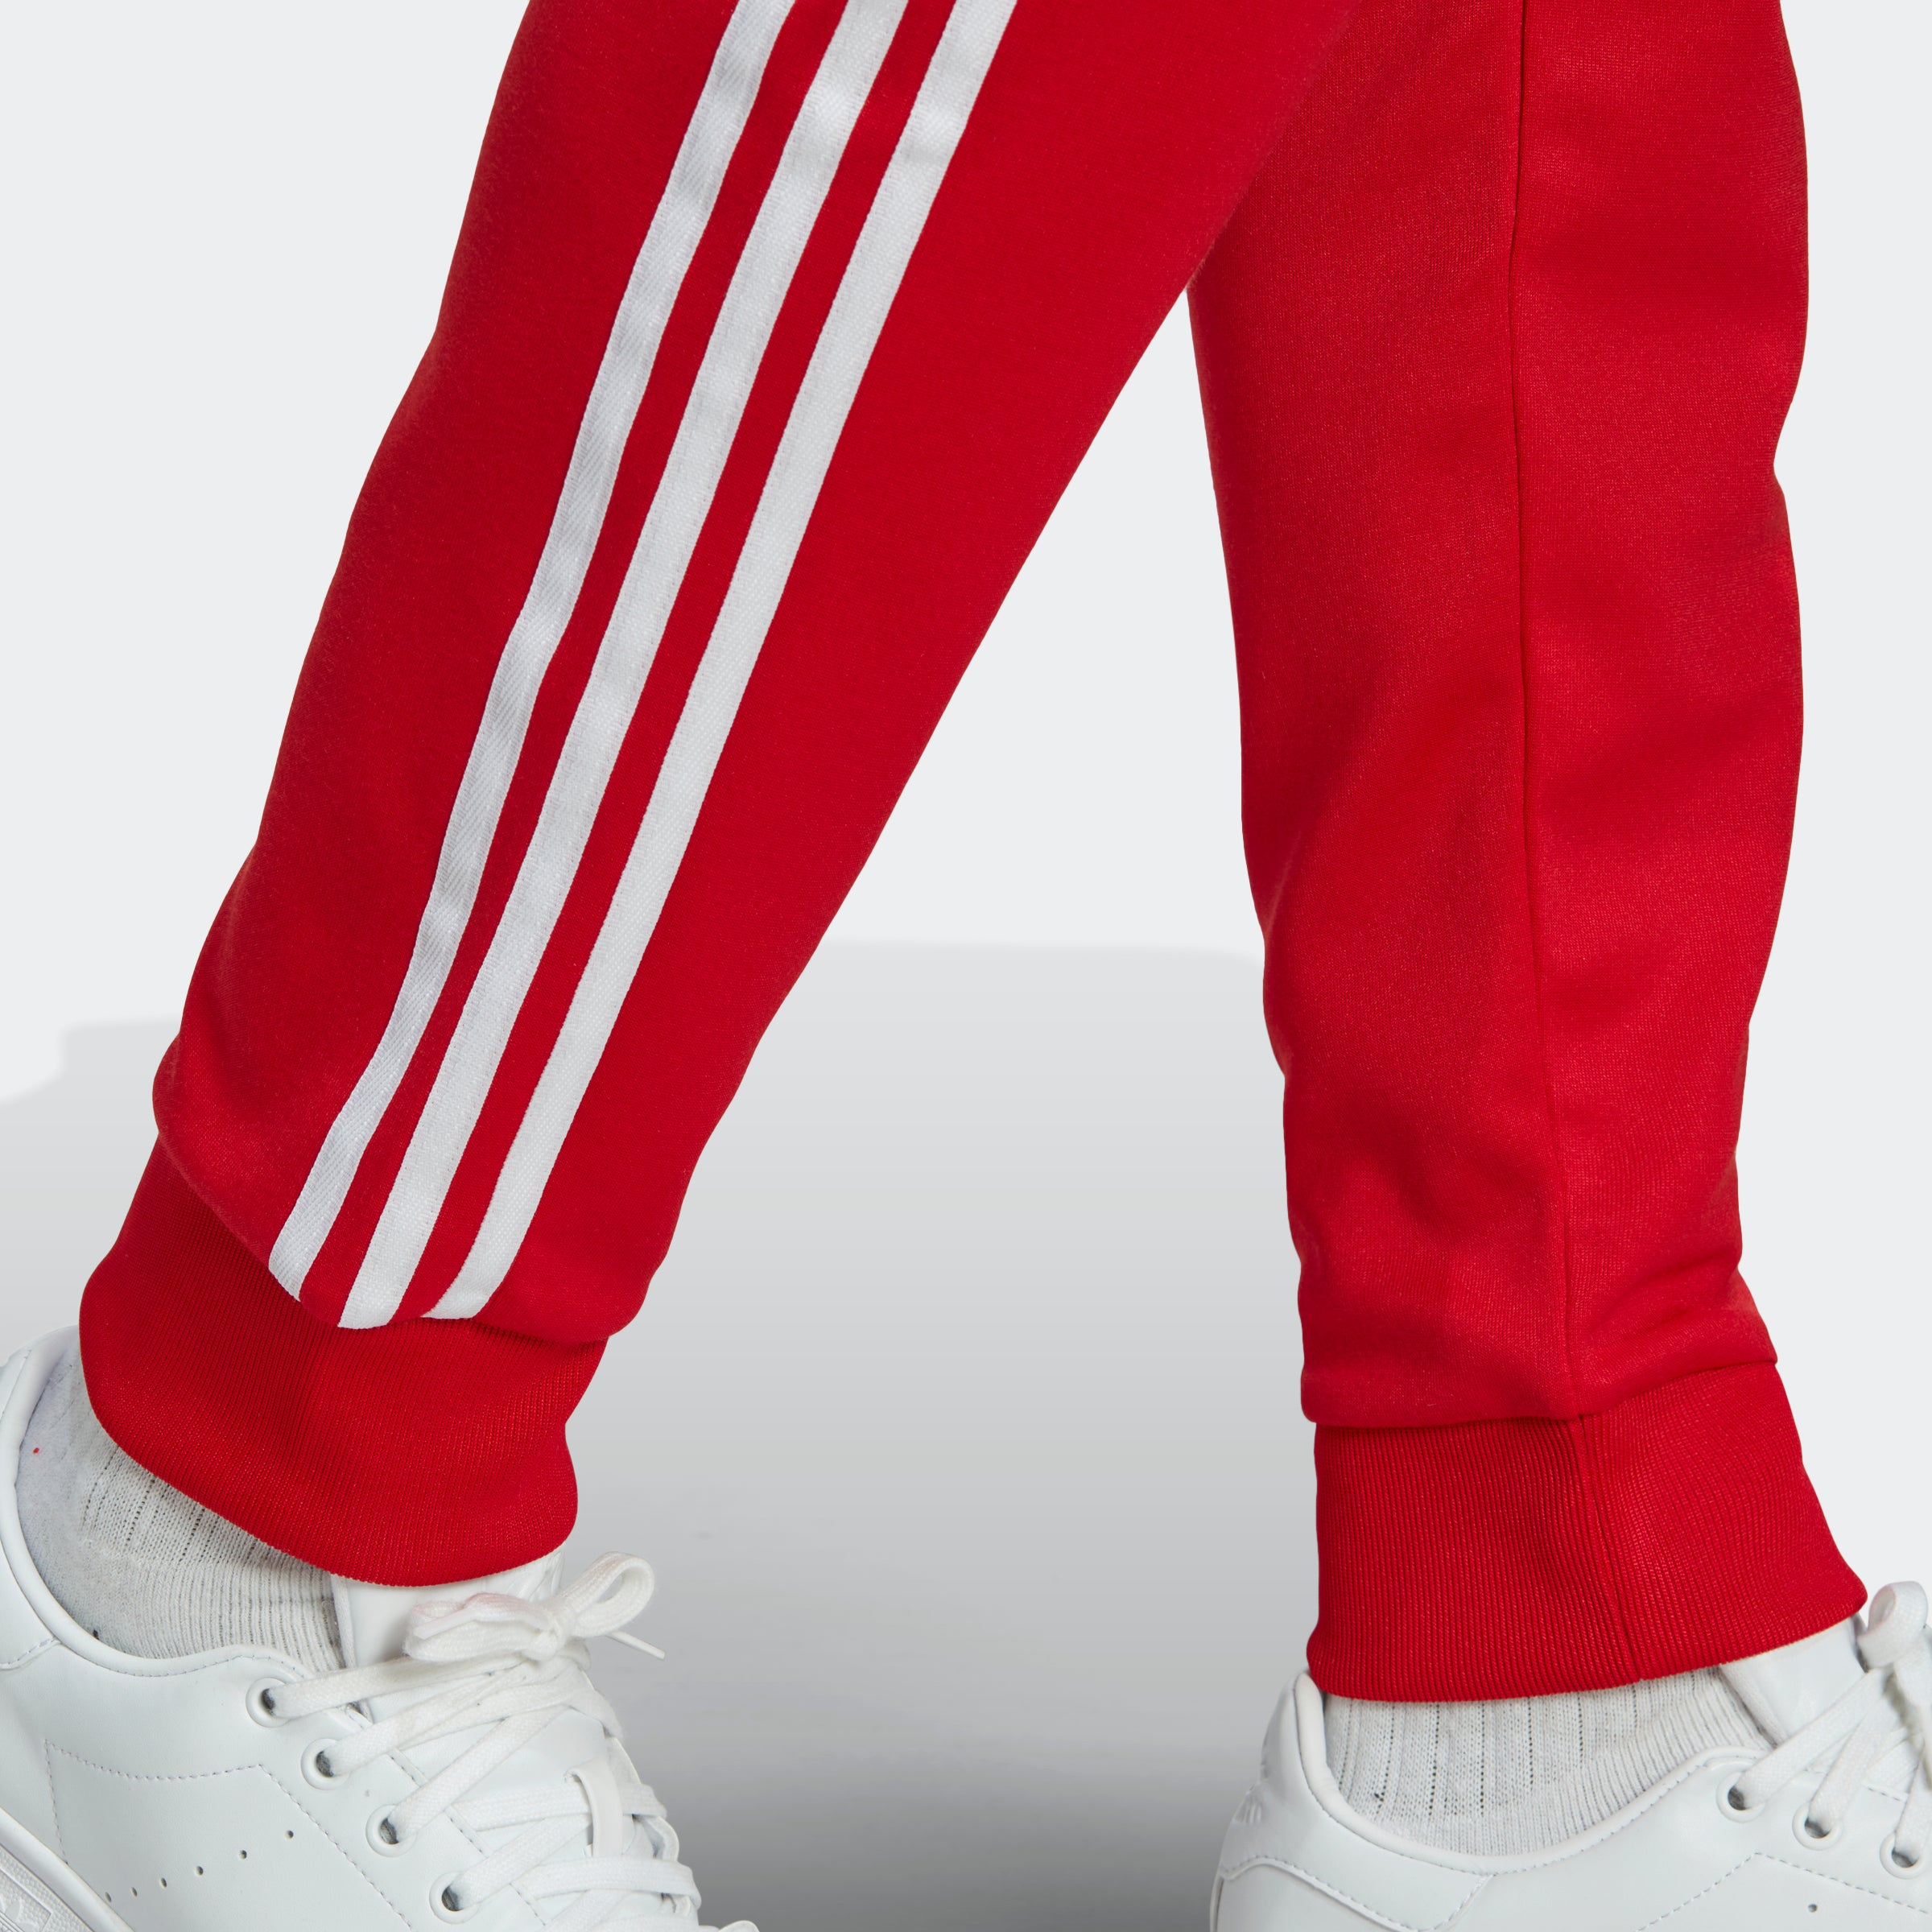 SST adidas Pants Scarlet Chicago Track City Better Sports Classics |